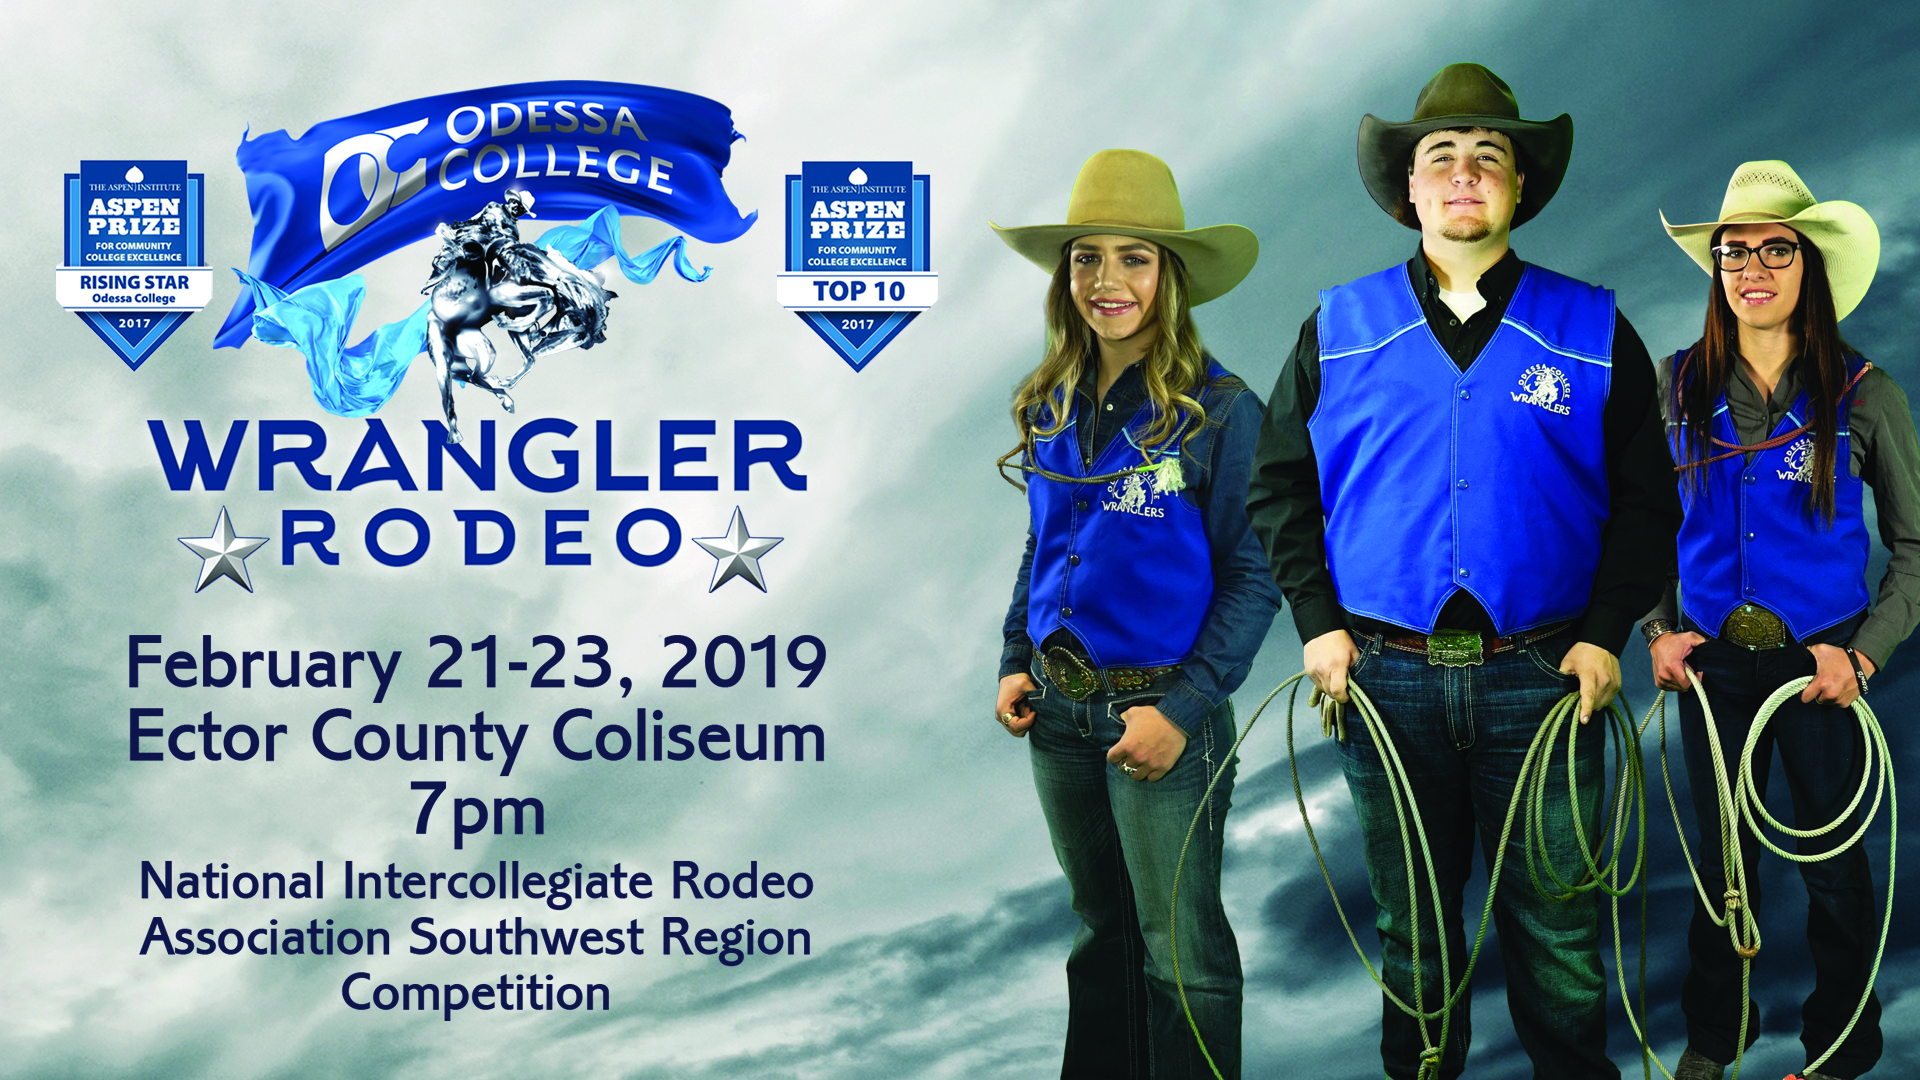 2019 Odessa College Rodeo Information and Ground Rules